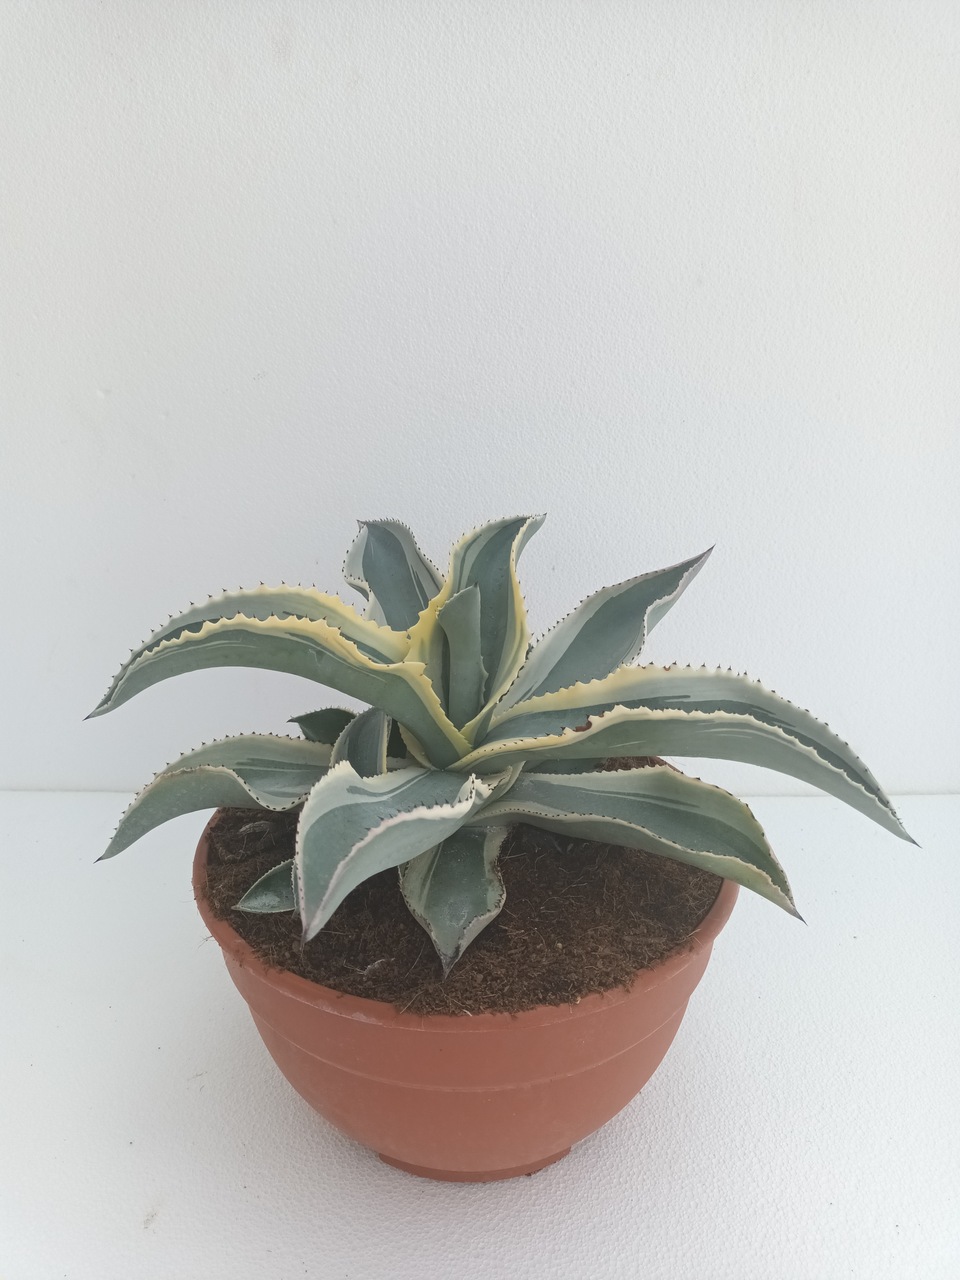 Agave Ivory curls T-25